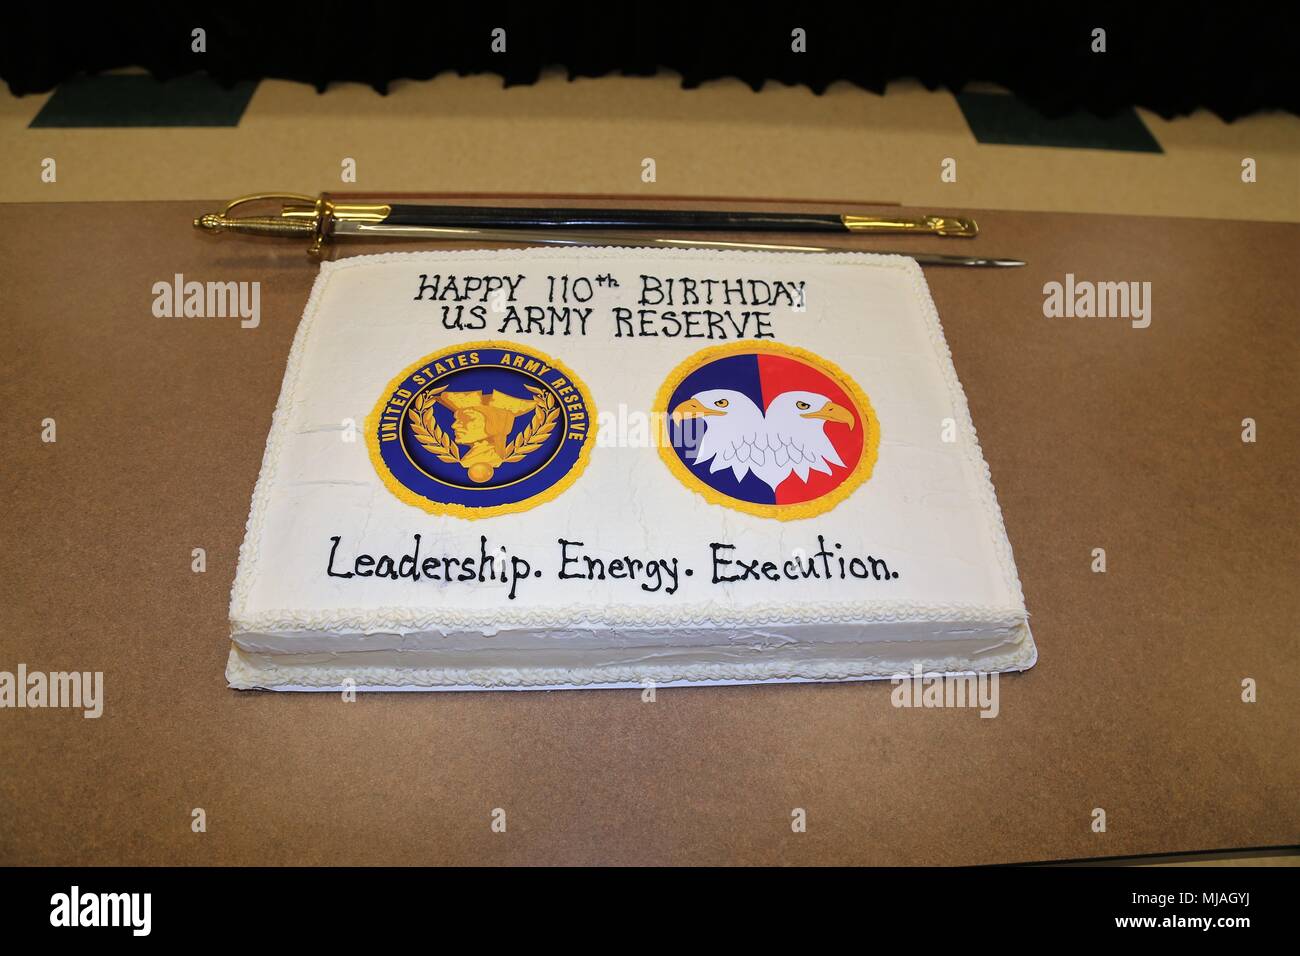 A cake is shown that is part of the installation observance of the Army Reserve’s 110th birthday April 23, 2018, at the Staff Sgt. Todd R. Cornell Noncommissioned Officer Academy at Fort McCoy, Wis. Dozens of people attended the event. The Army Reserve was founded on April 23, 1908, when Congress authorized the Army to establish a Medical Reserve Corps, the official predecessor of the Army Reserve. Today, approximately 200,000 Army Reserve Soldiers serve around the globe. Sgt. Maj. Michael D. Sprague with the 88th Readiness Division served as the guest speaker for the event. (U.S. Army Photo b Stock Photo